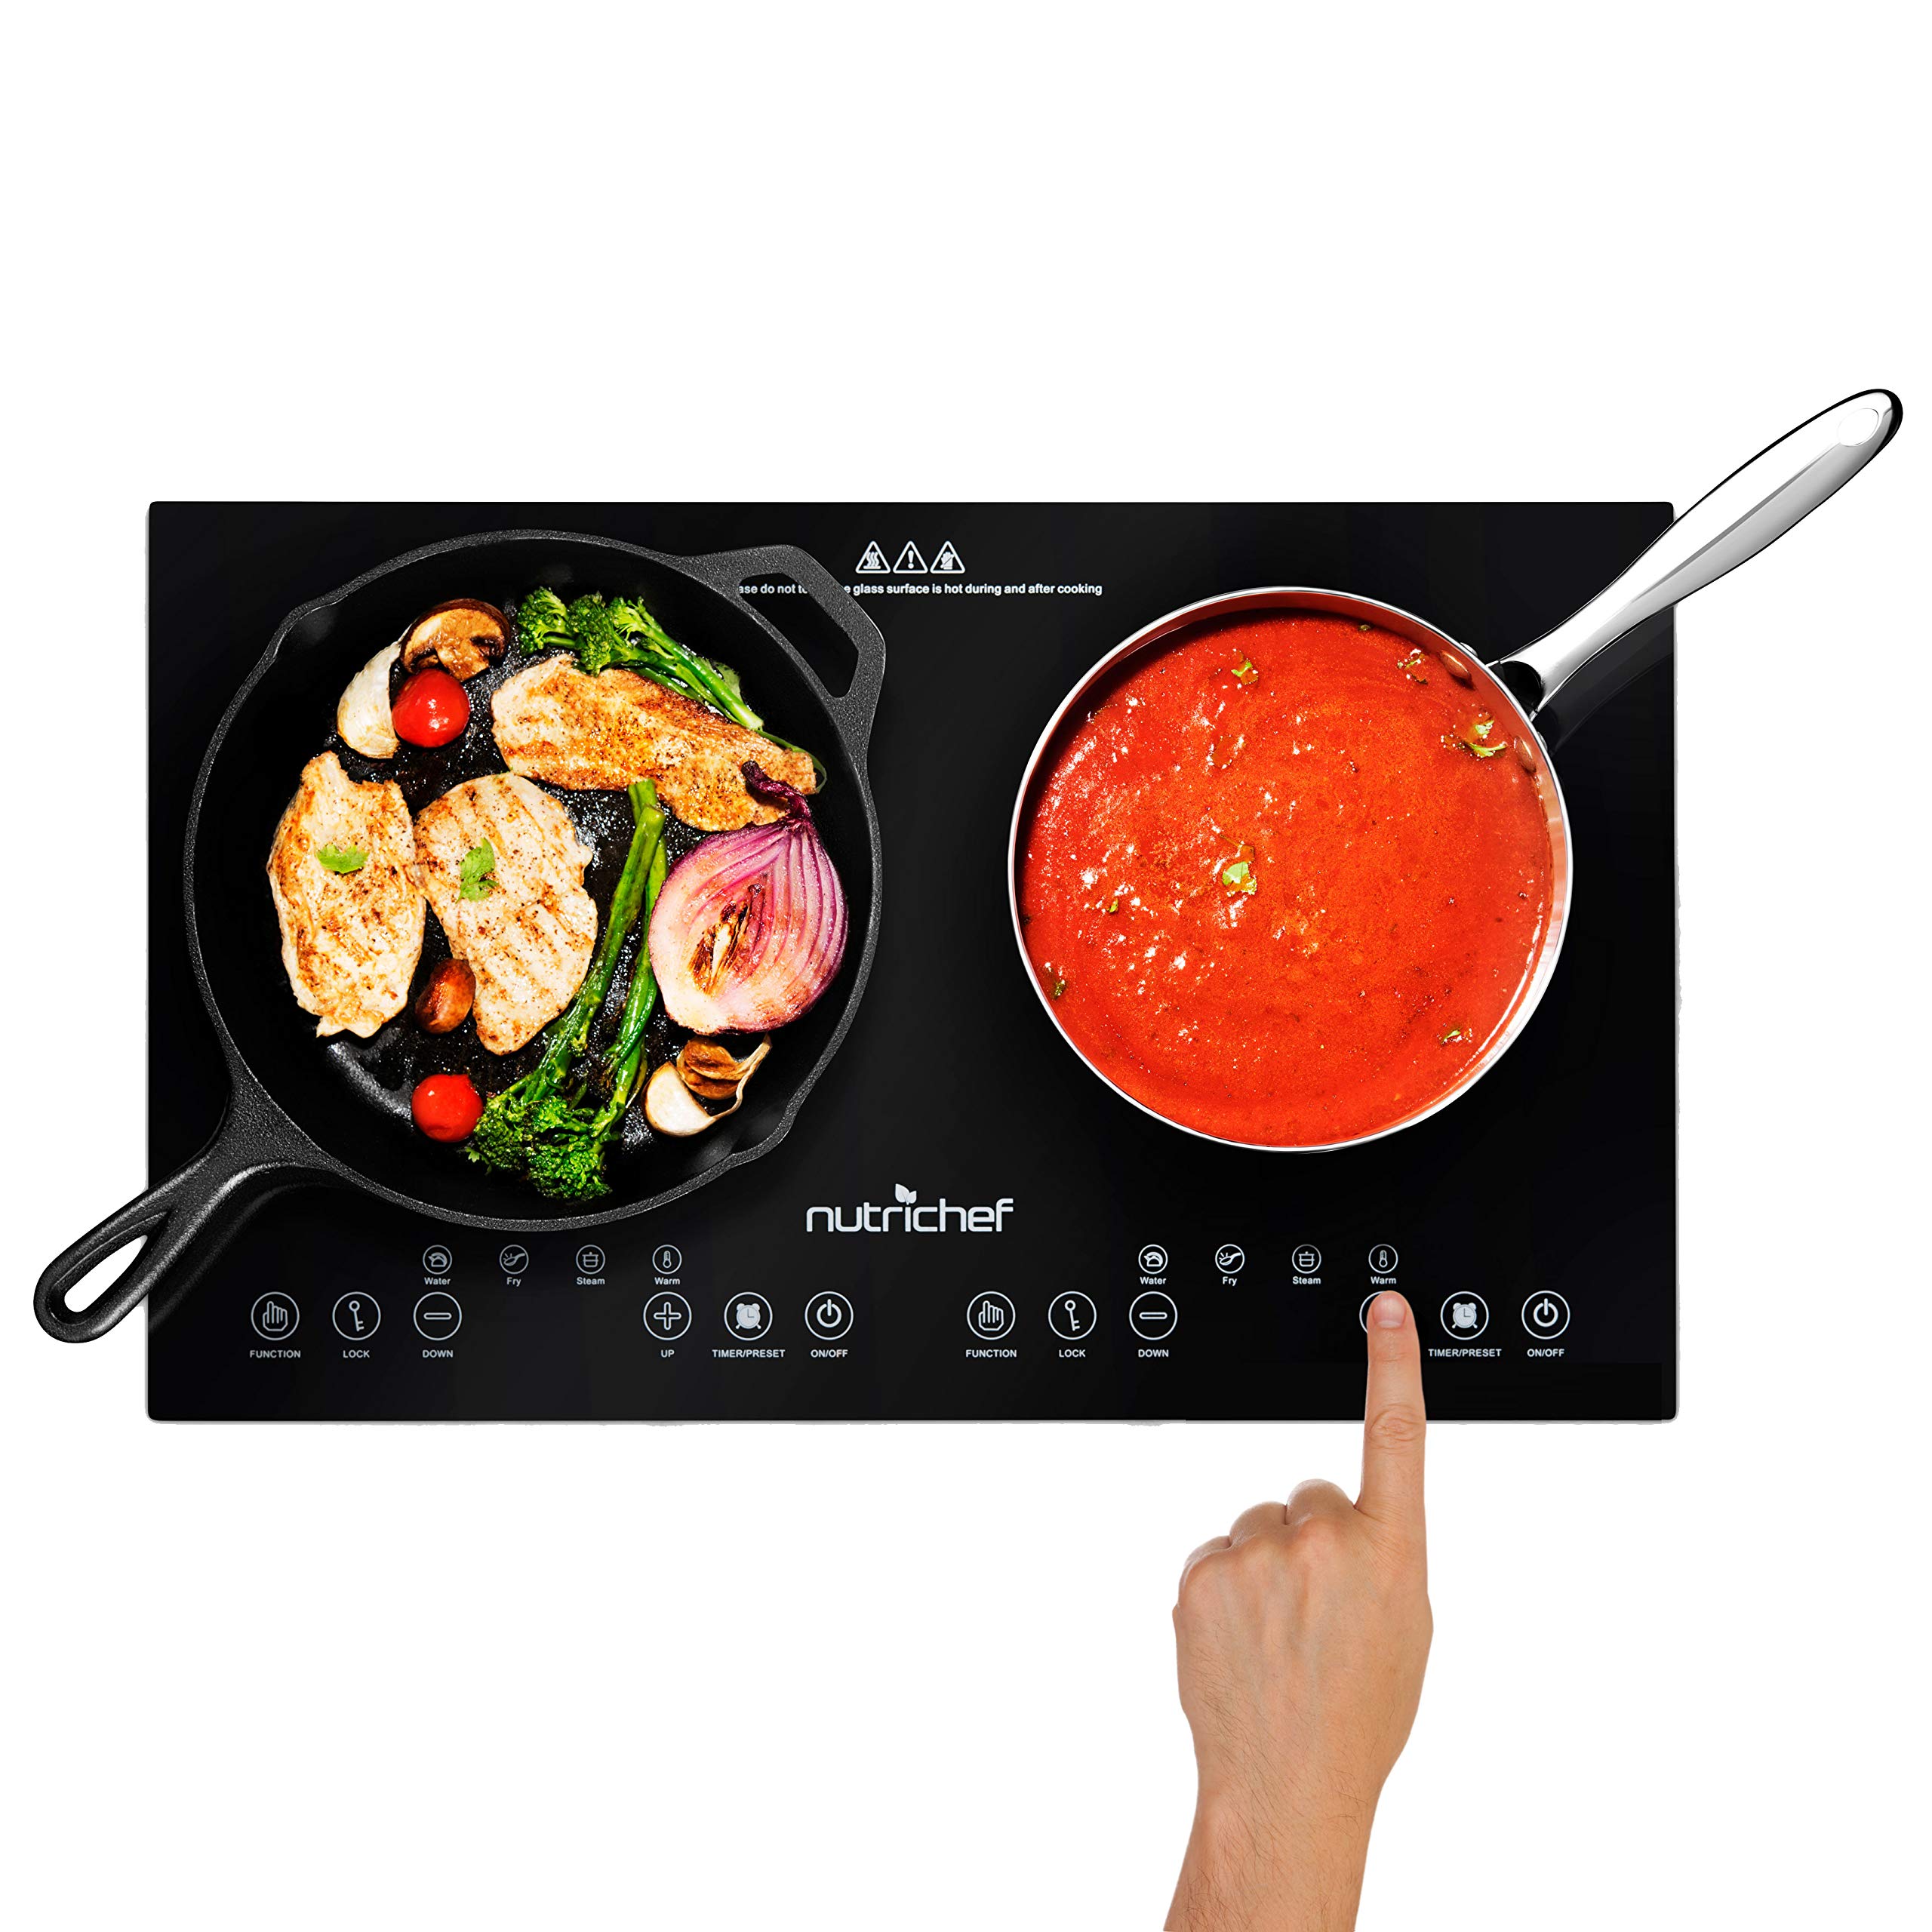 NutriChef Double Induction Cooktop - Portable 120V Digital Ceramic Dual Burner w/ Kids Safety Lock - Works with Flat Cast Iron Pan,1800 Watt,Touch Sensor Control, 12 Controls - NutriChef PKSTIND48